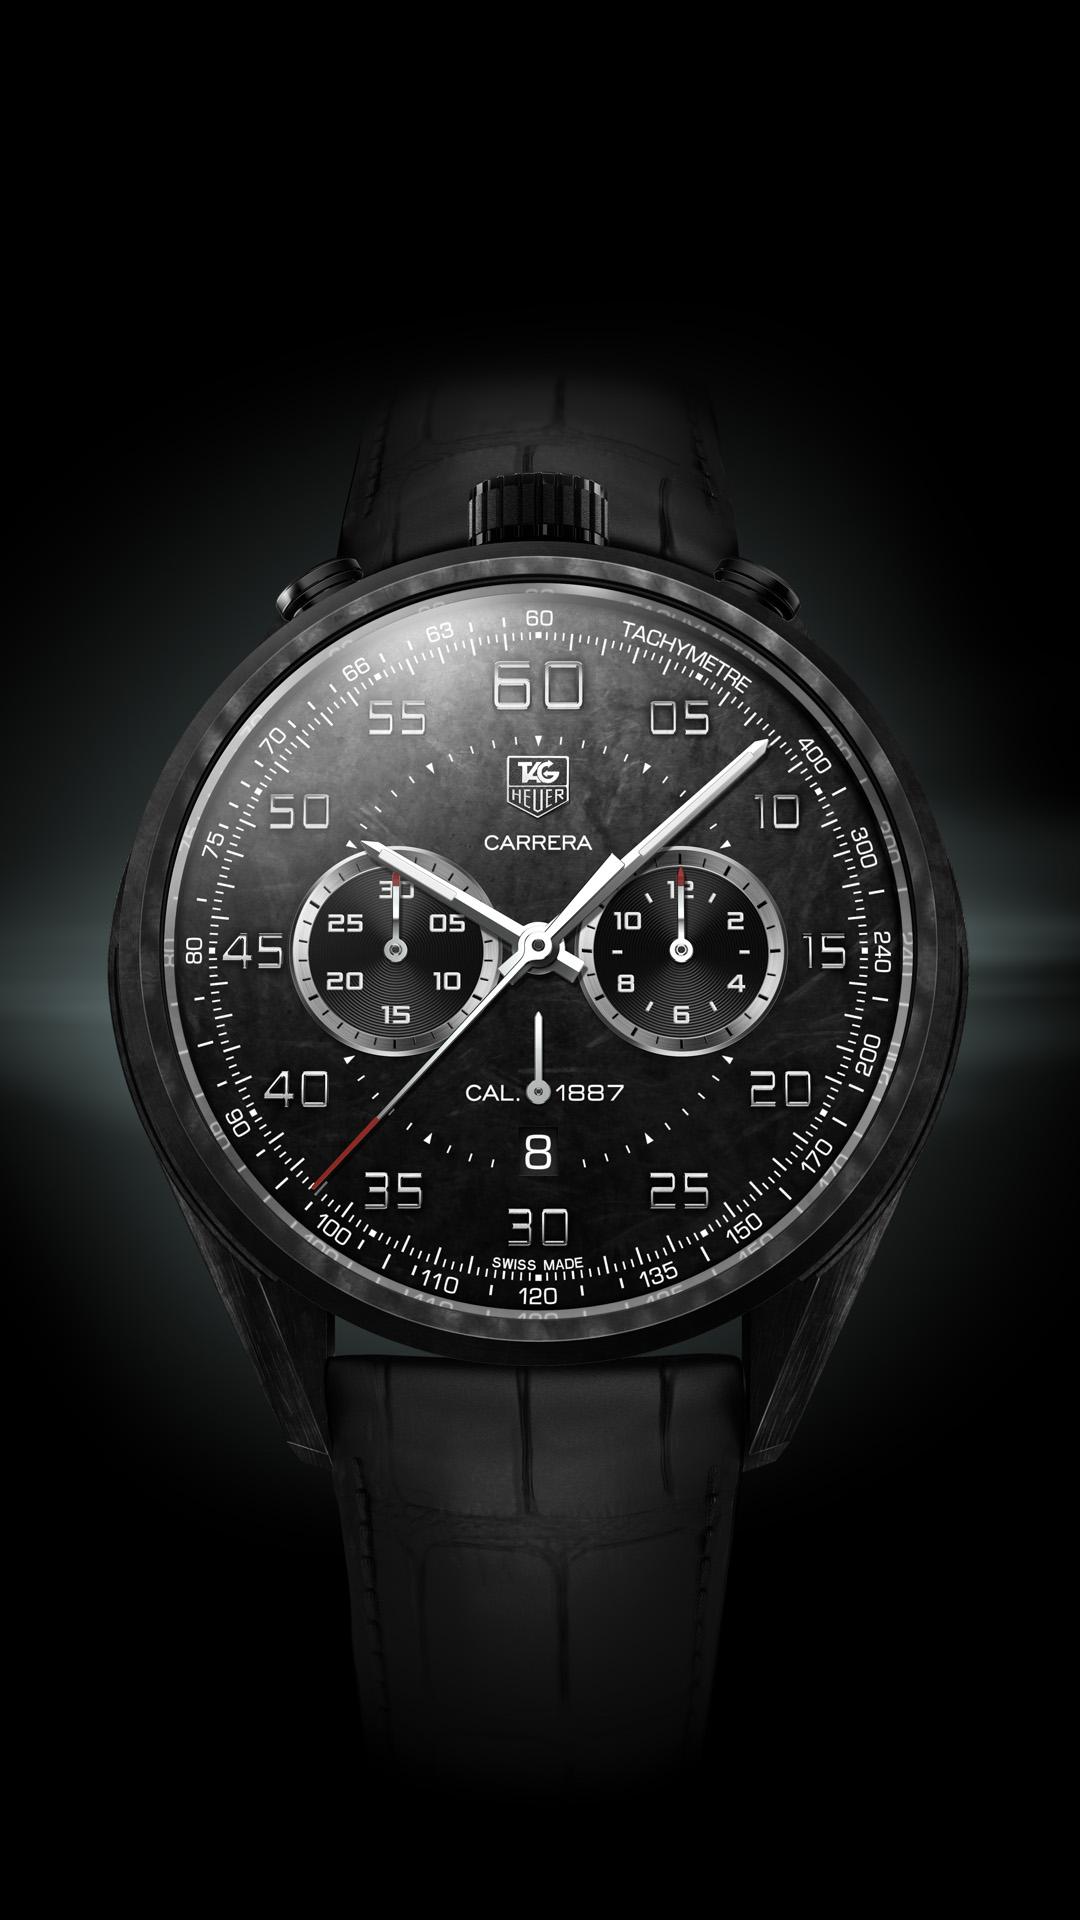 TAG Heuer Carrera htc one wallpaper, free and easy to download